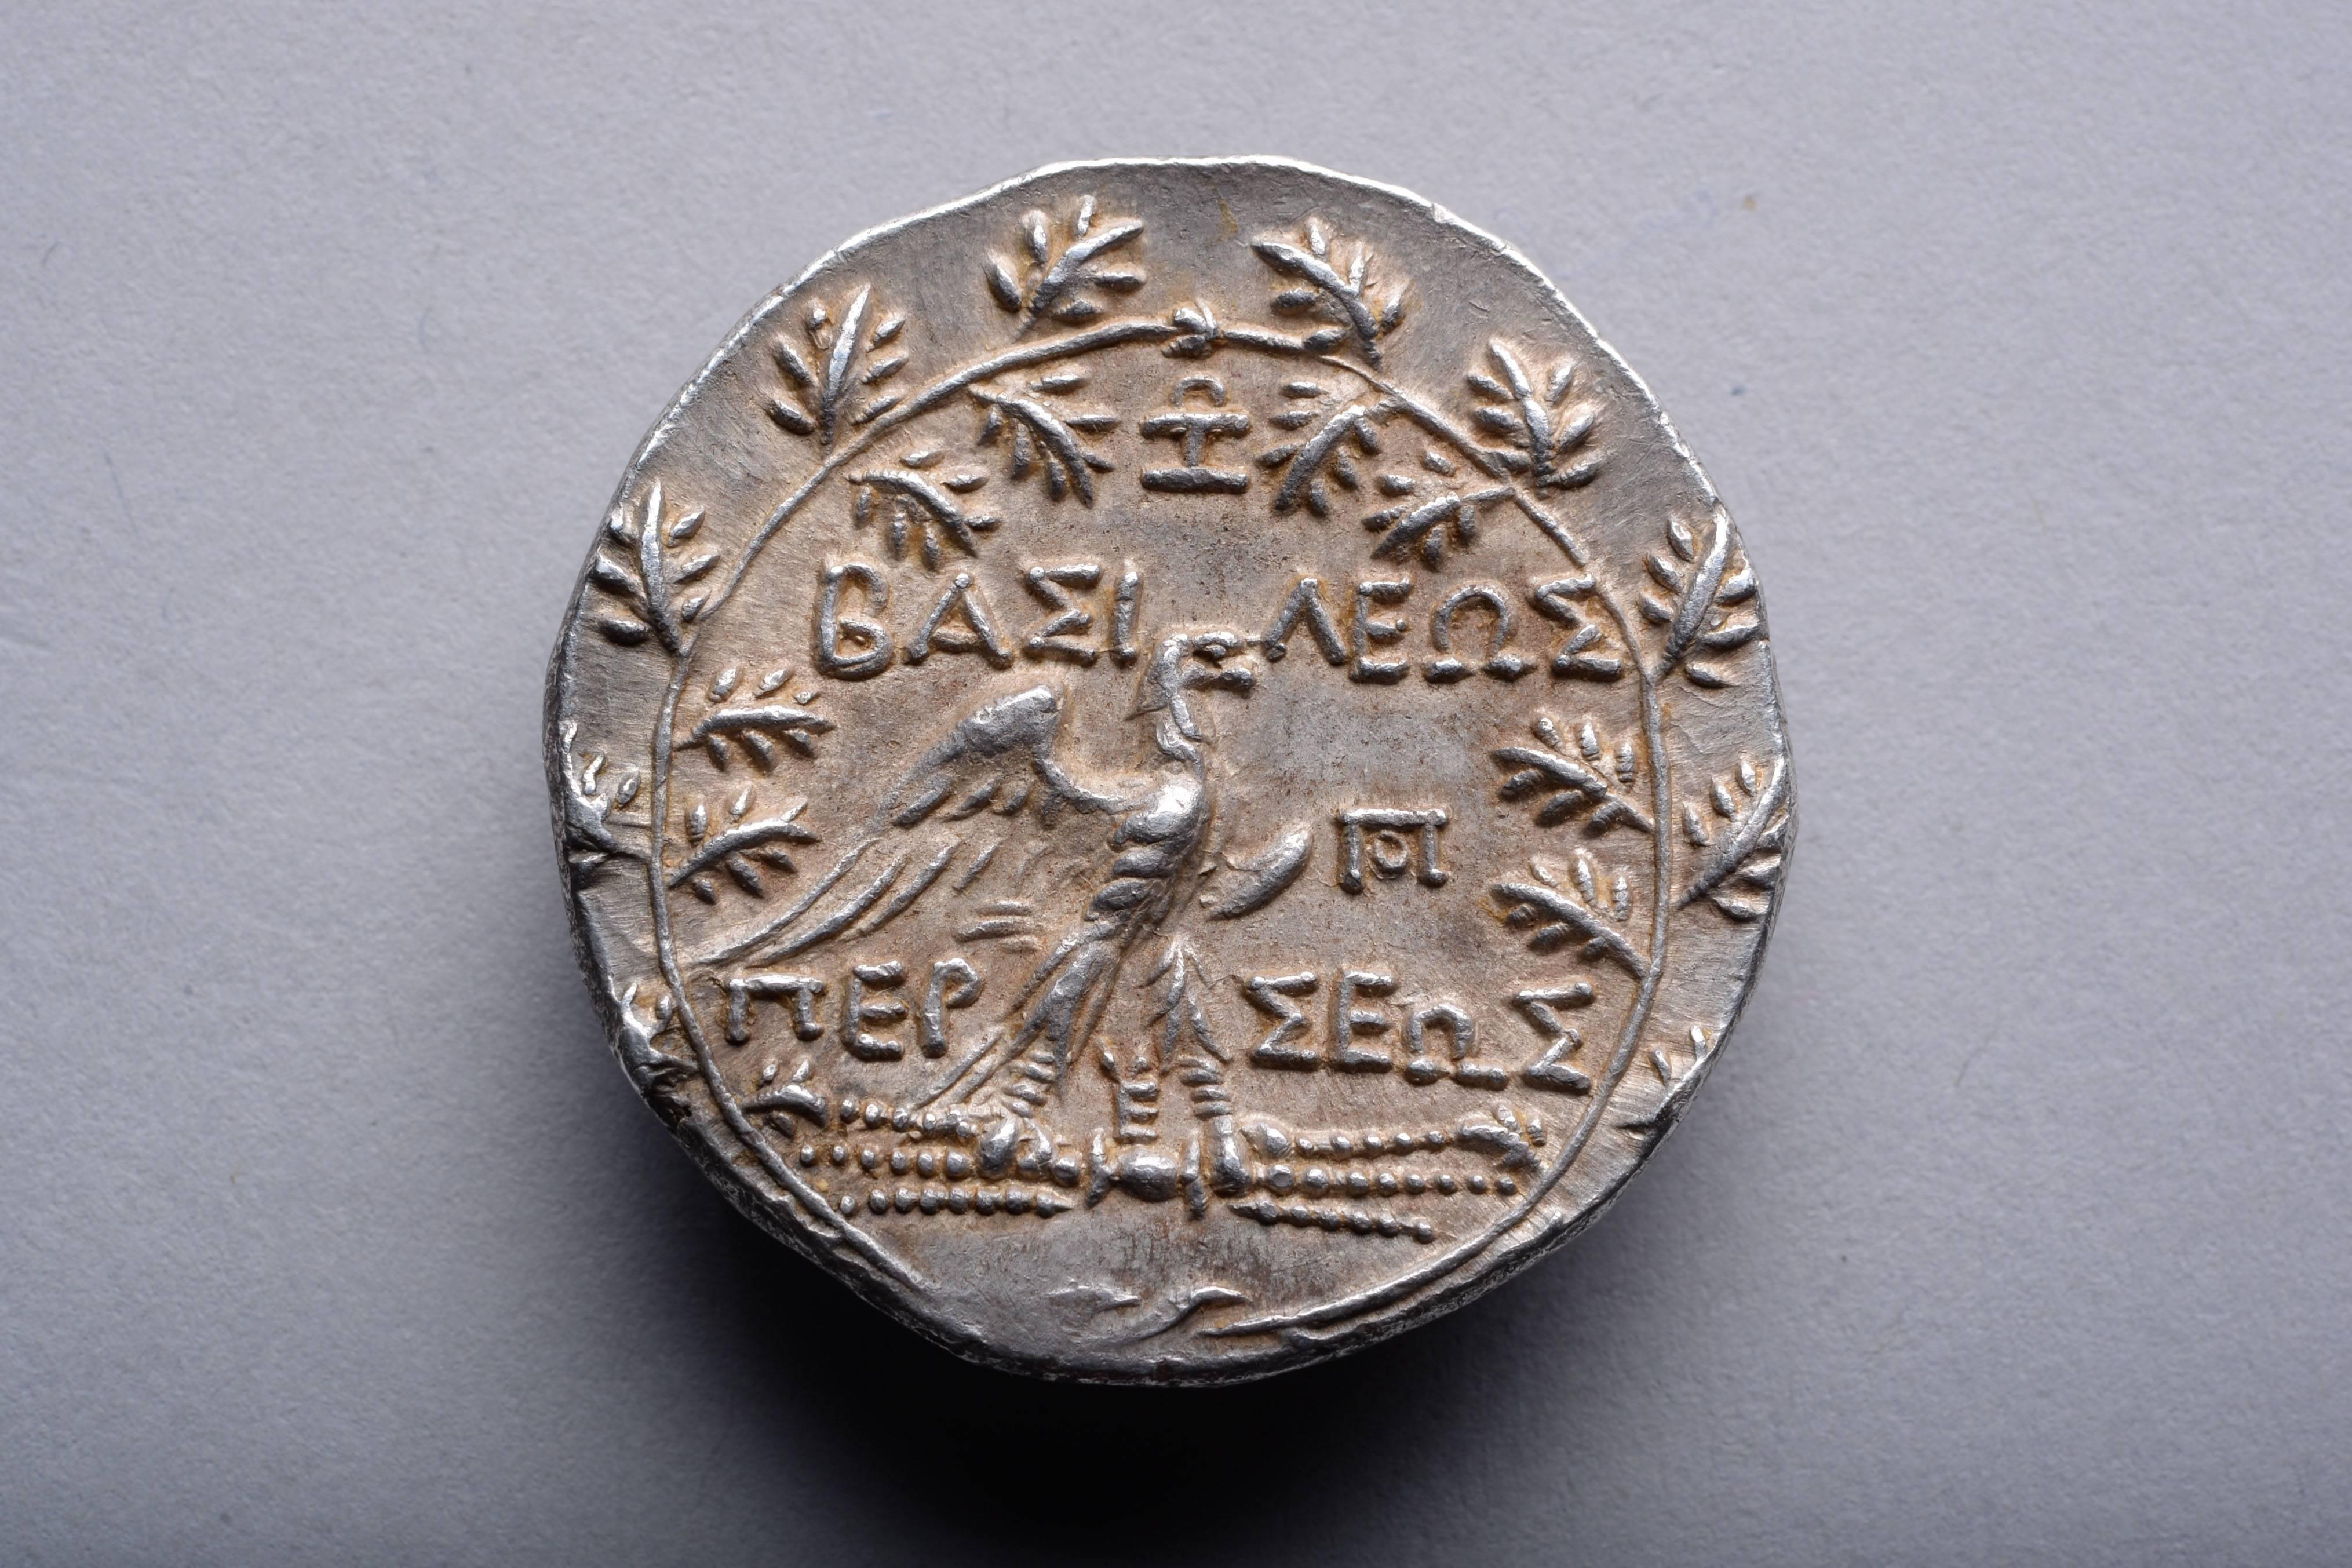 A silver tetradrachm minted under King Perseus of Macedon. Issued under magistrate Zoilos at the Pella or Amphipolis mint, circa 174 - 173 BC.

The obverse with the head of Perseus, a diadem cutting through the rough curls of his hair.

The reverse